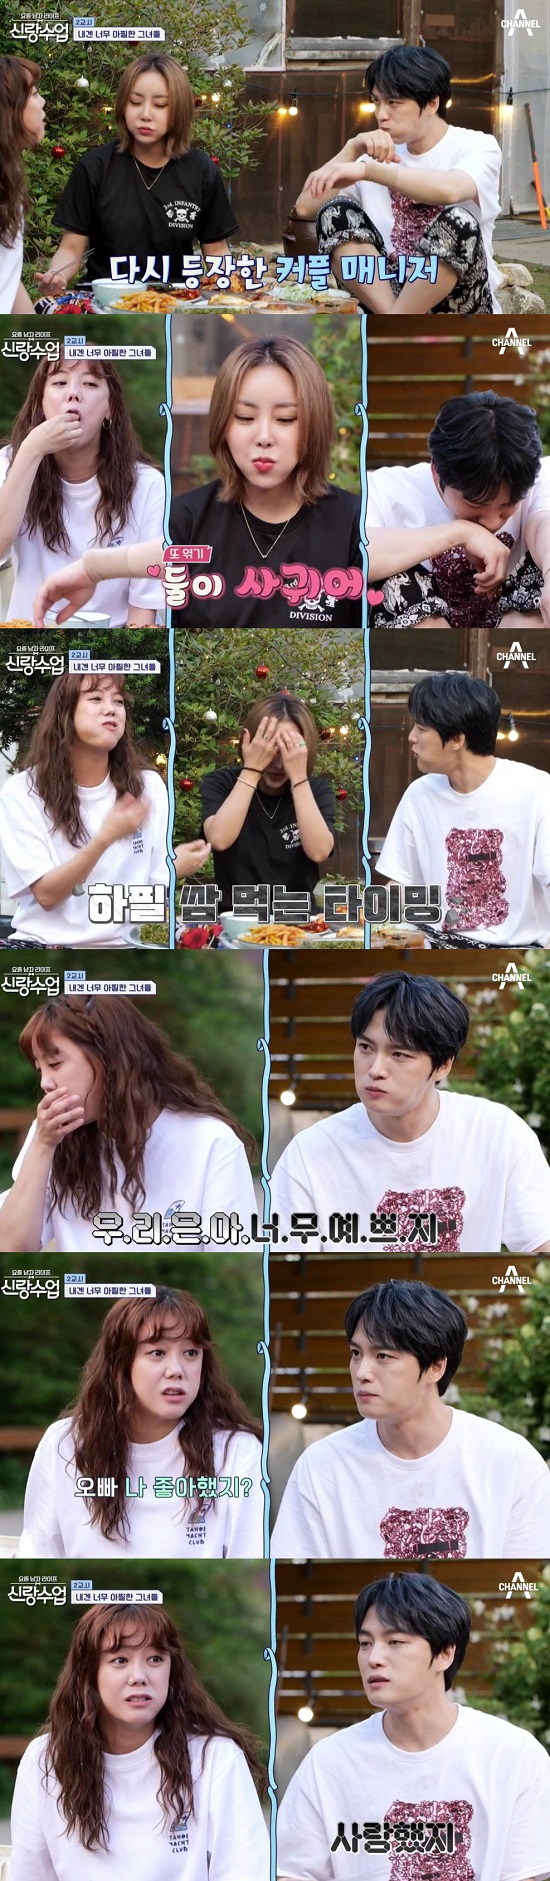 Bridegroom class Jaejoong Confessions to Go Eun-ahOn Channel As These Days Mens Life Bridegroom Lessons (hereinafter referred to as Bridegroom Lessons), Jaejoong was pictured spending the day in the country with Narsha and Go Eun-ah.On this day, Narsha said to Jaejoong and Go Eun-ah during the meal, Lets make a good relationship. Jaejoong laughed with a formal answer saying, We are so beautiful.Go Eun-ah, who was eating ssam, laughed, saying, Dont talk to me while Im doing this. Am I pretty now? Jaejoong replied, Pretty, and Go Eun-ah joked, Did you like me?Jaejoong responded dullly, I loved you. Go Eun-ah appealed, Im a good girl, and Jaejoong said, Uh, good girl.Pictures: Channel A broadcast screen